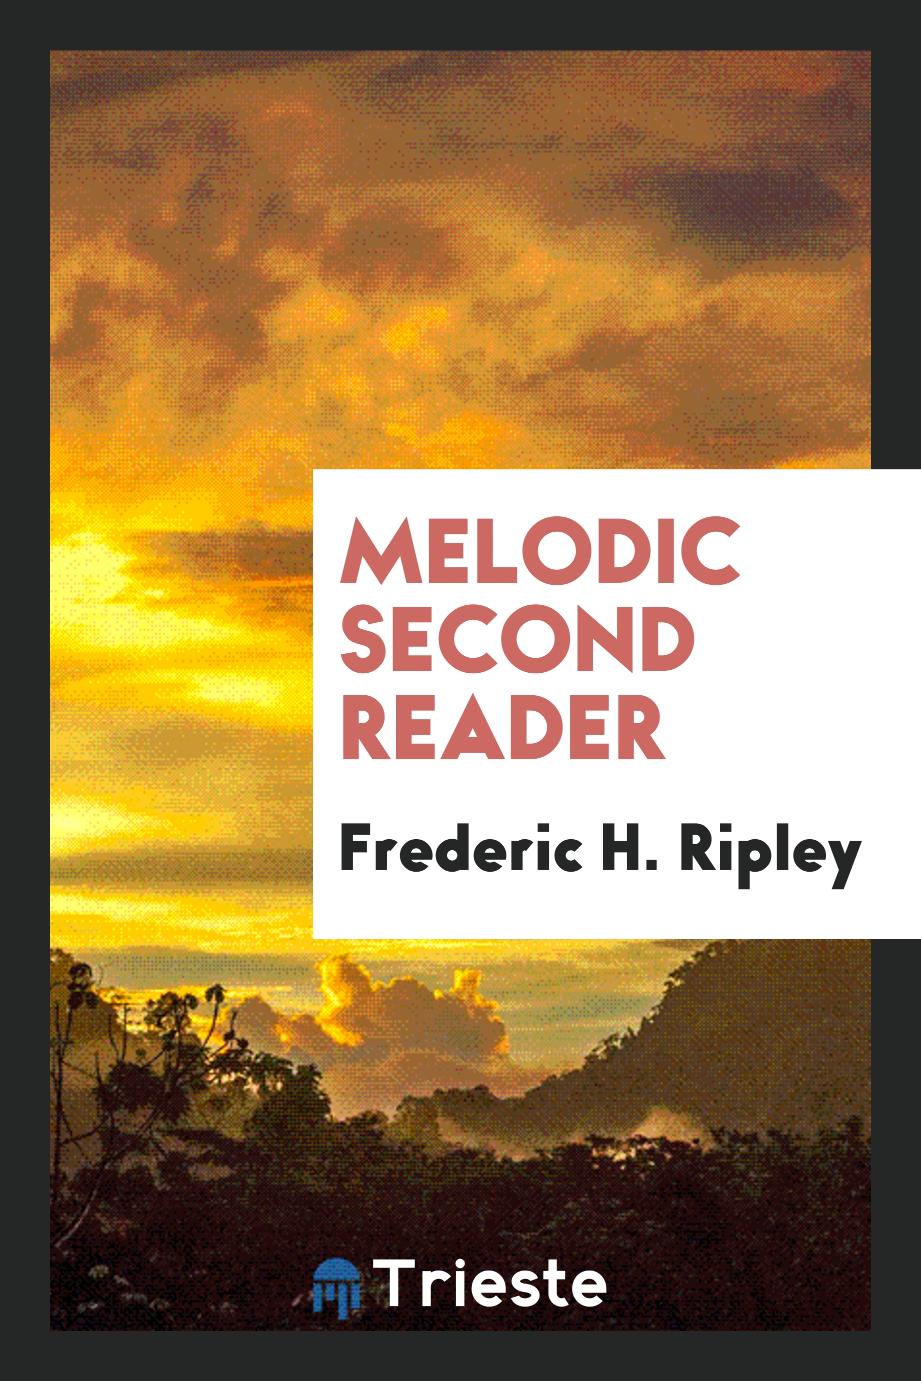 Frederic H. Ripley - Melodic Second Reader